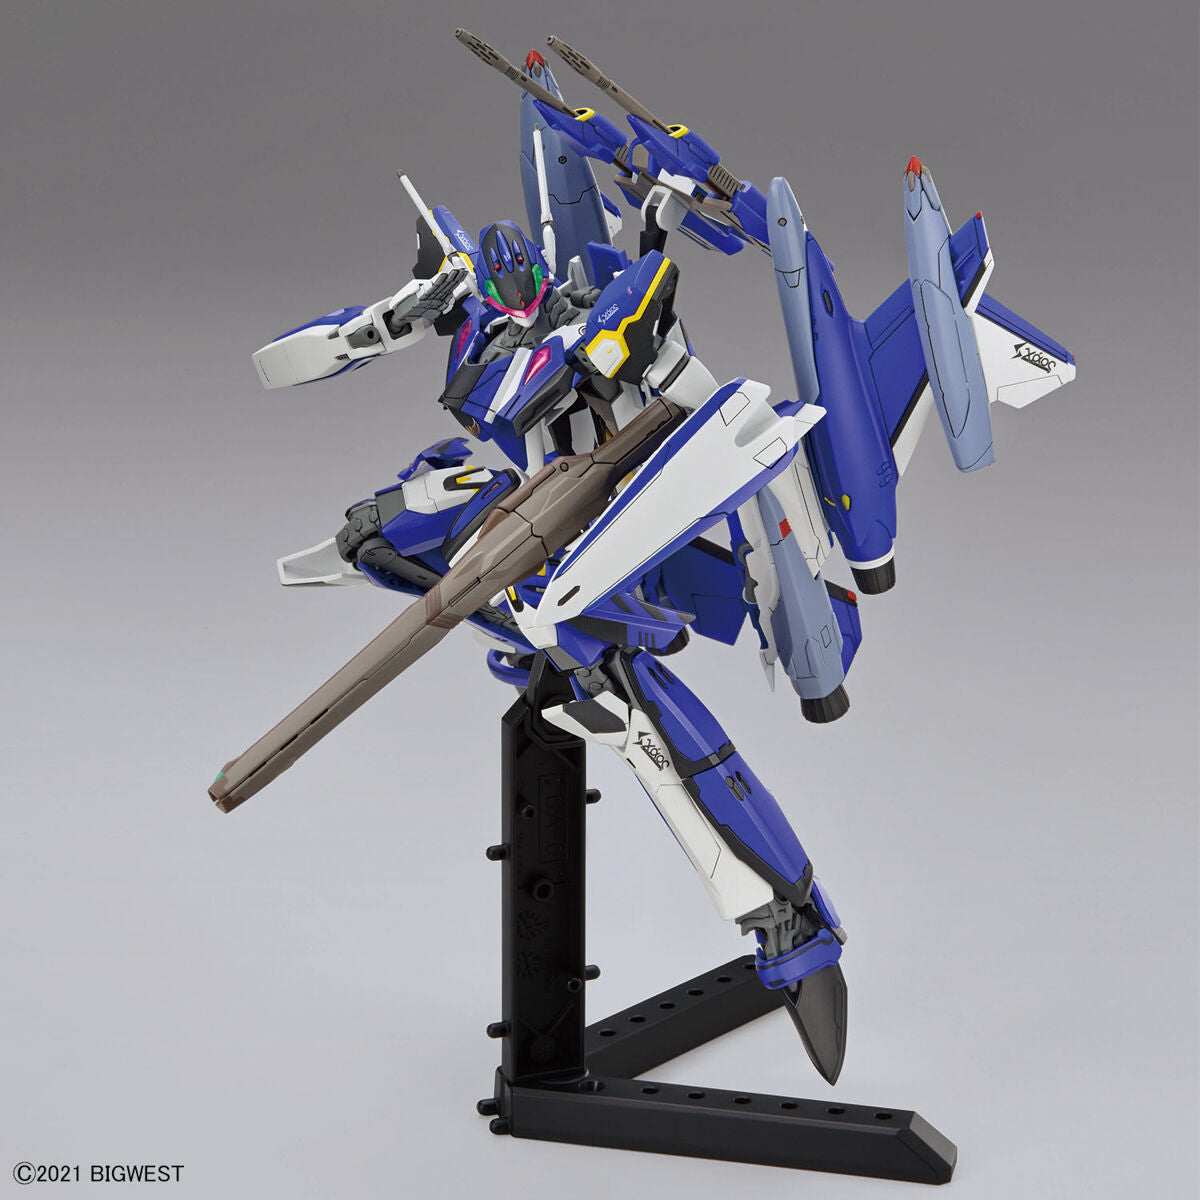 [Online store limited discount for selected models plus decals] Bandai 1/100 HG Macross YF-29 Durandal Valkyrie (Maximilon Genus Machine) assembled model + YF-29 Full Set Pack exclusive decals